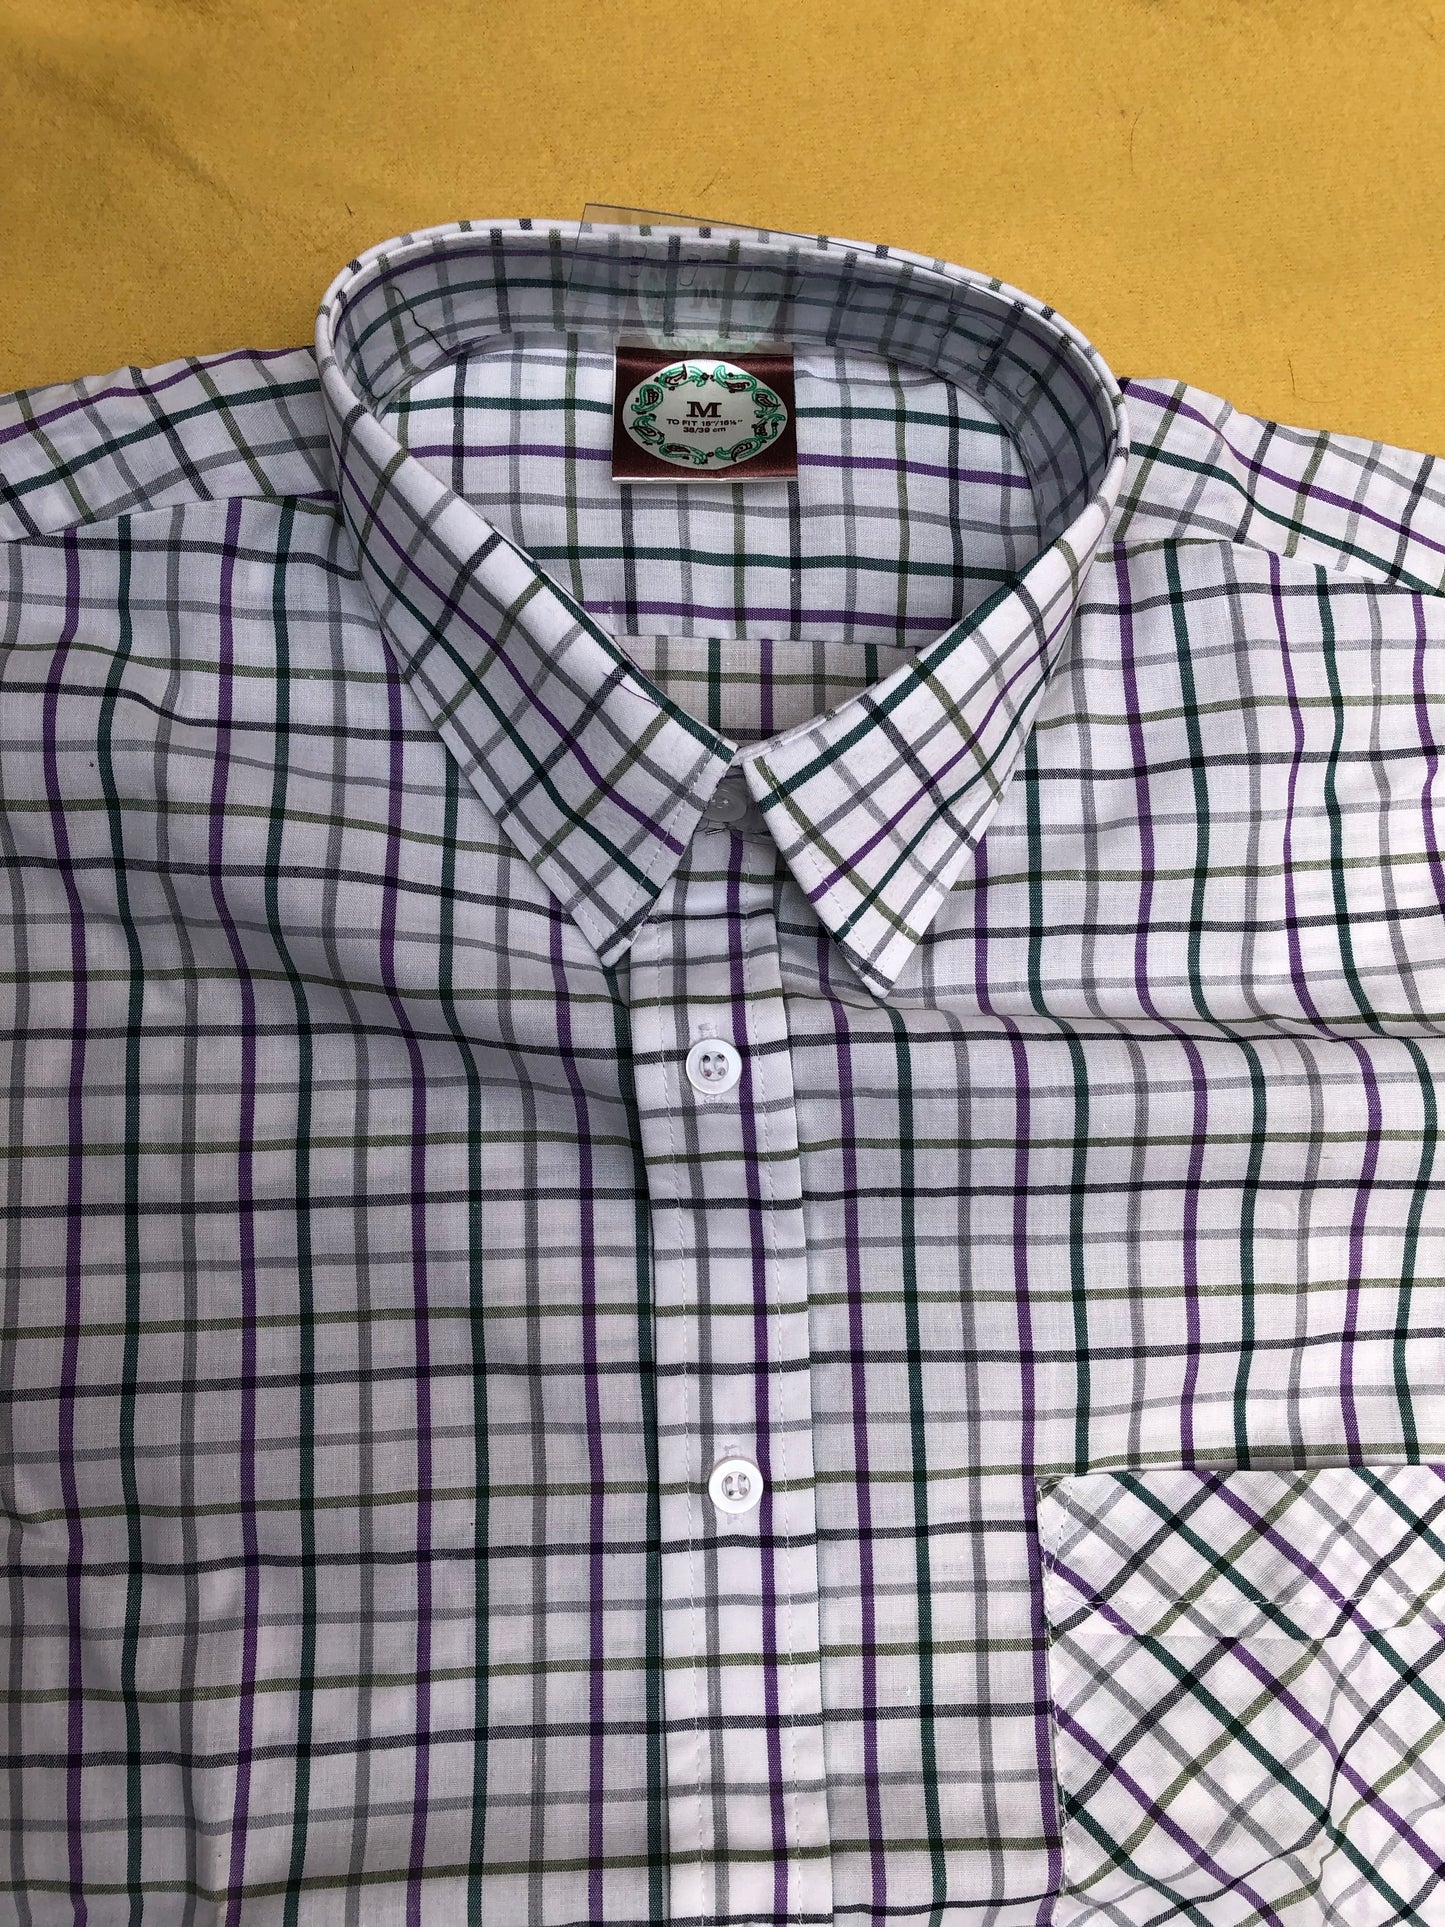 Town and country style shirt size M FREE POSTAGE